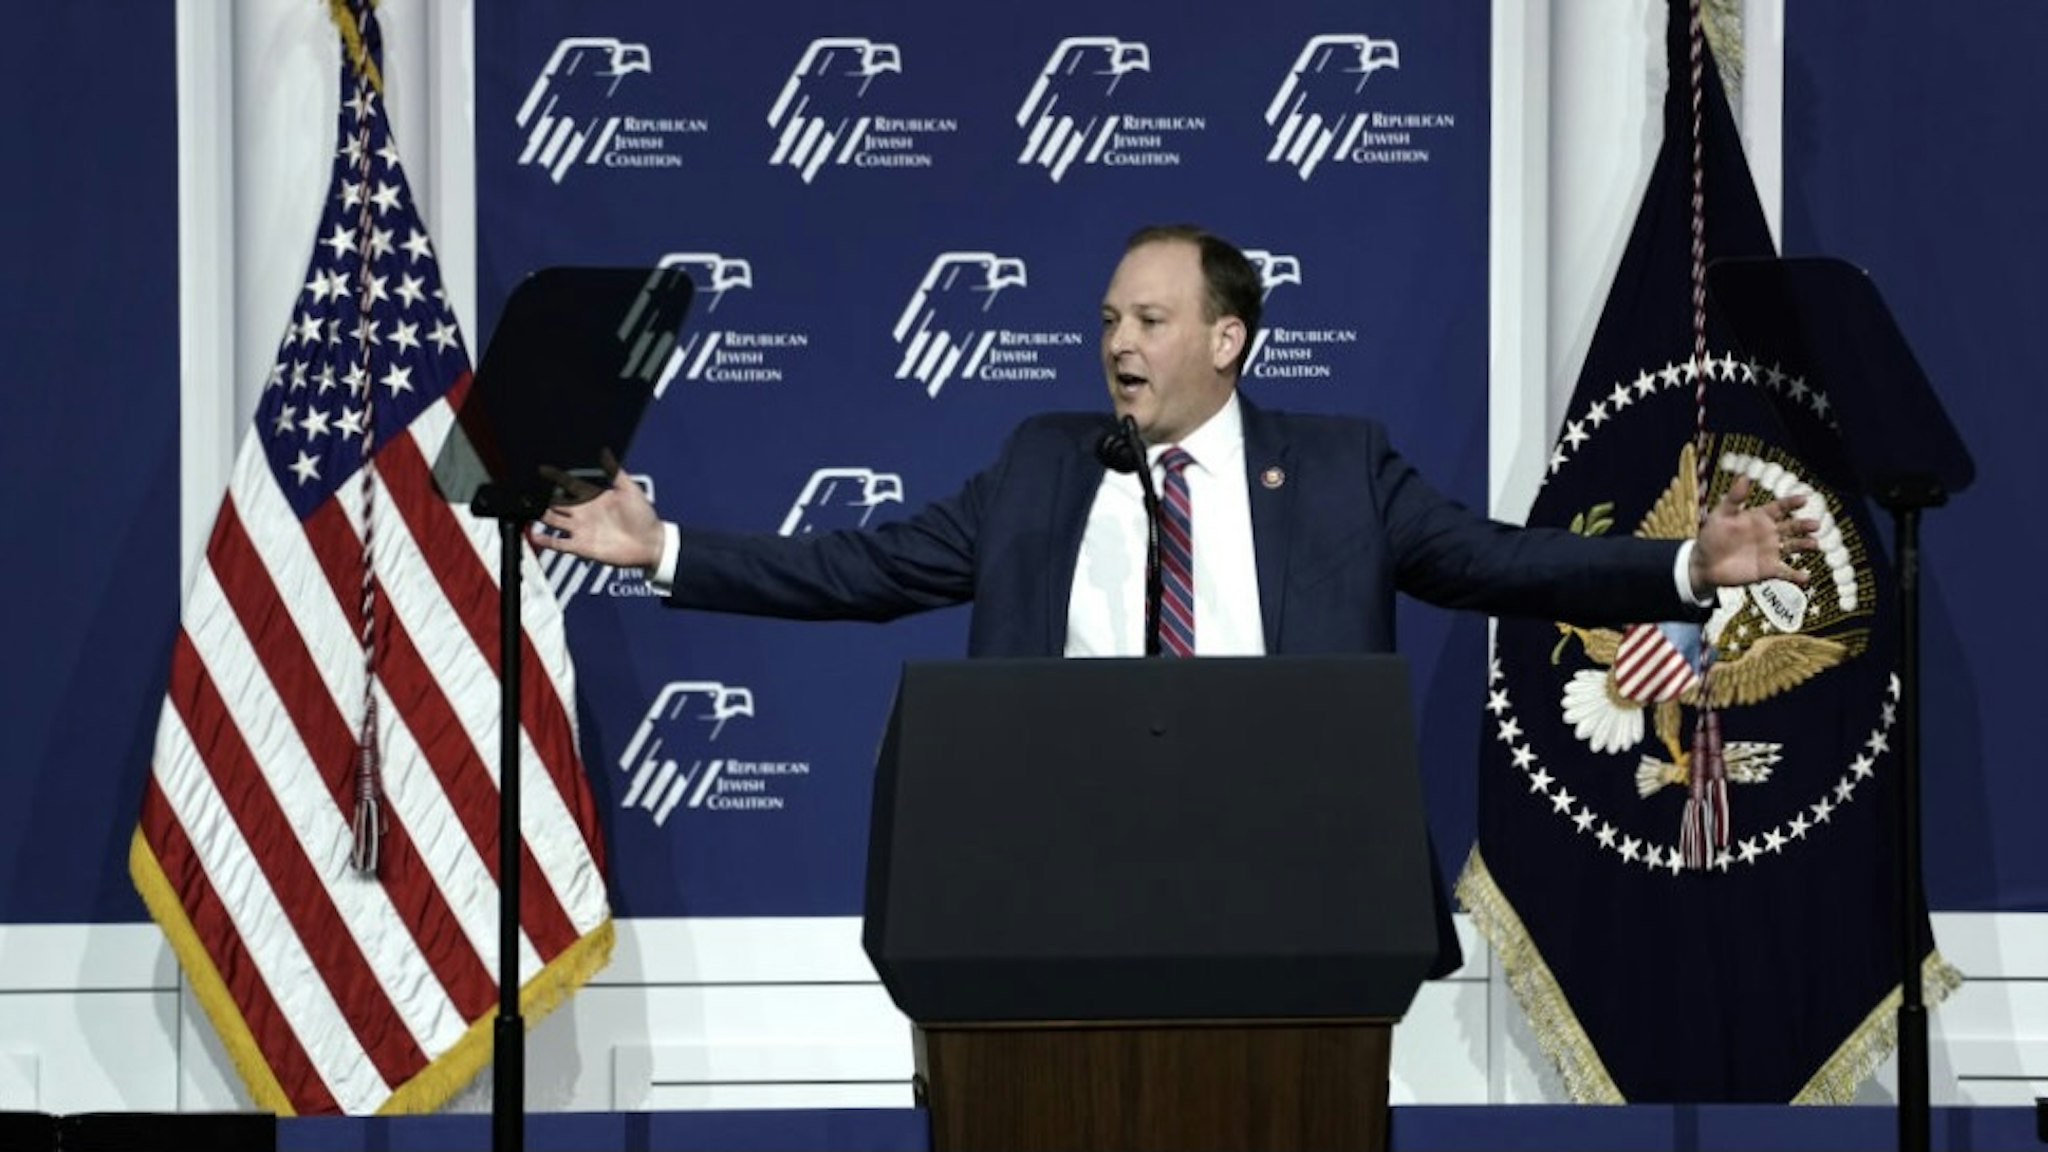 Representative Lee Zeldin, a Republican from New York, speaks during the Republican Jewish Coalitions National Leadership Meeting in Las Vegas, Nevada, U.S., on Saturday, April 6, 2019. President Donald Trump made a sarcastic reference to Representative Ilhan Omar during a speech in Las Vegas, a day after prosecutors said a New York man was arrested for threatening to murder the freshman Minnesota Democrat. Photographer: Eilon Paz/Bloomberg